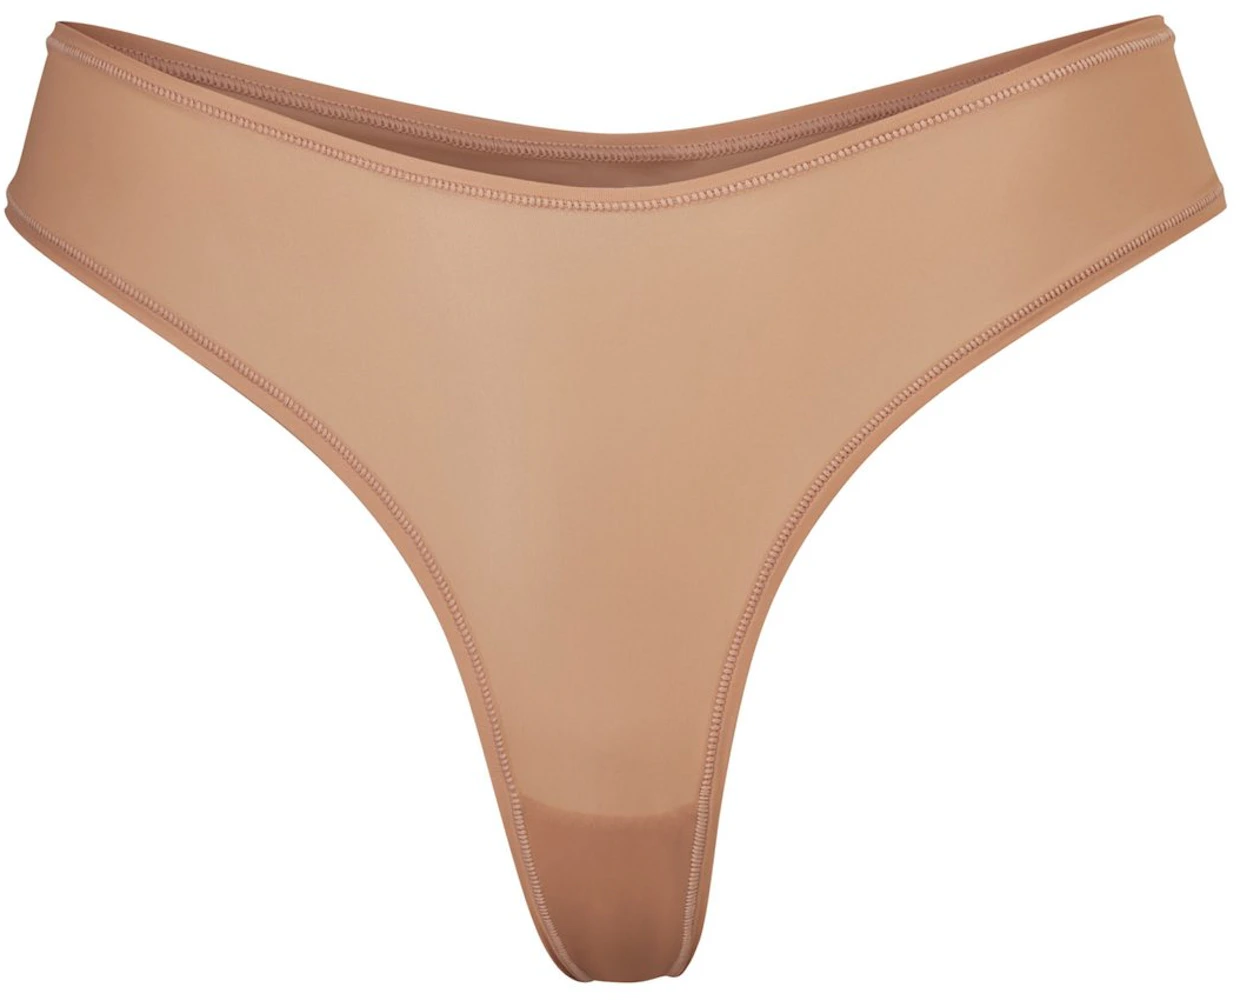 https://images.stockx.com/images/SKIMS-Jelly-Sheer-Dipped-Thong-Sienna.jpg?fit=fill&bg=FFFFFF&w=700&h=500&fm=webp&auto=compress&q=90&dpr=2&trim=color&updated_at=1611607158